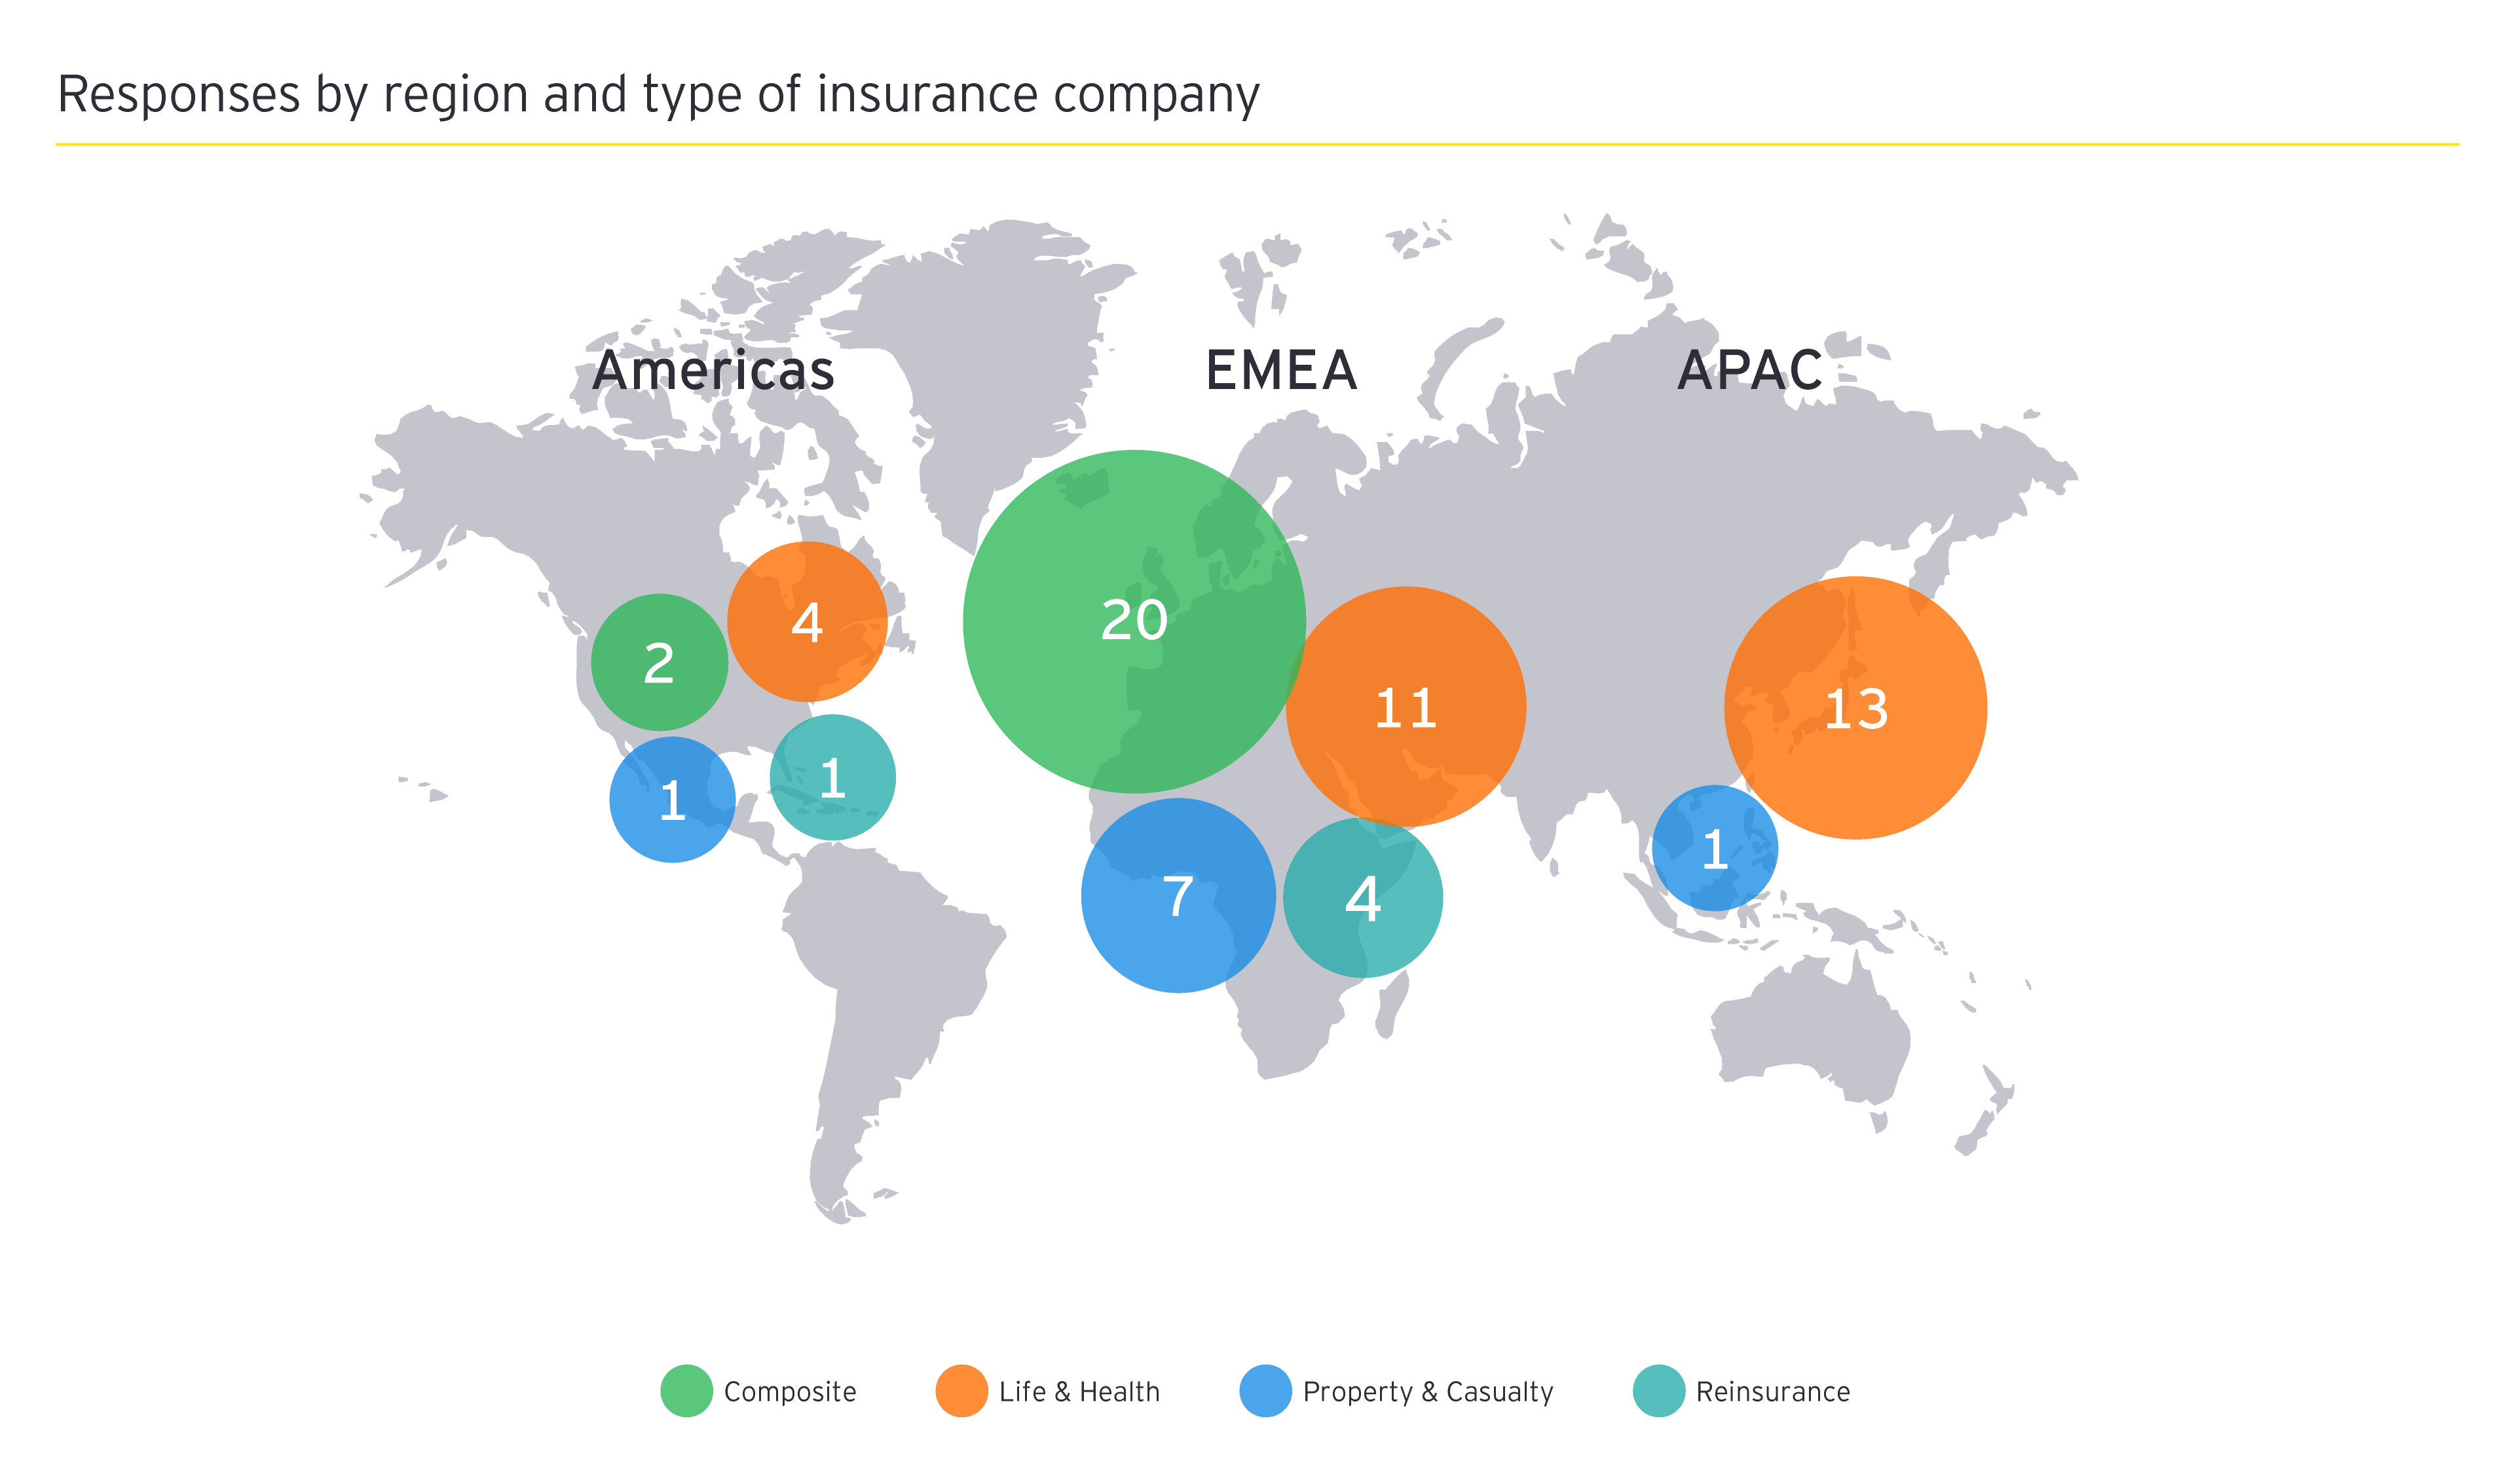 Responses by region and type of insurance company